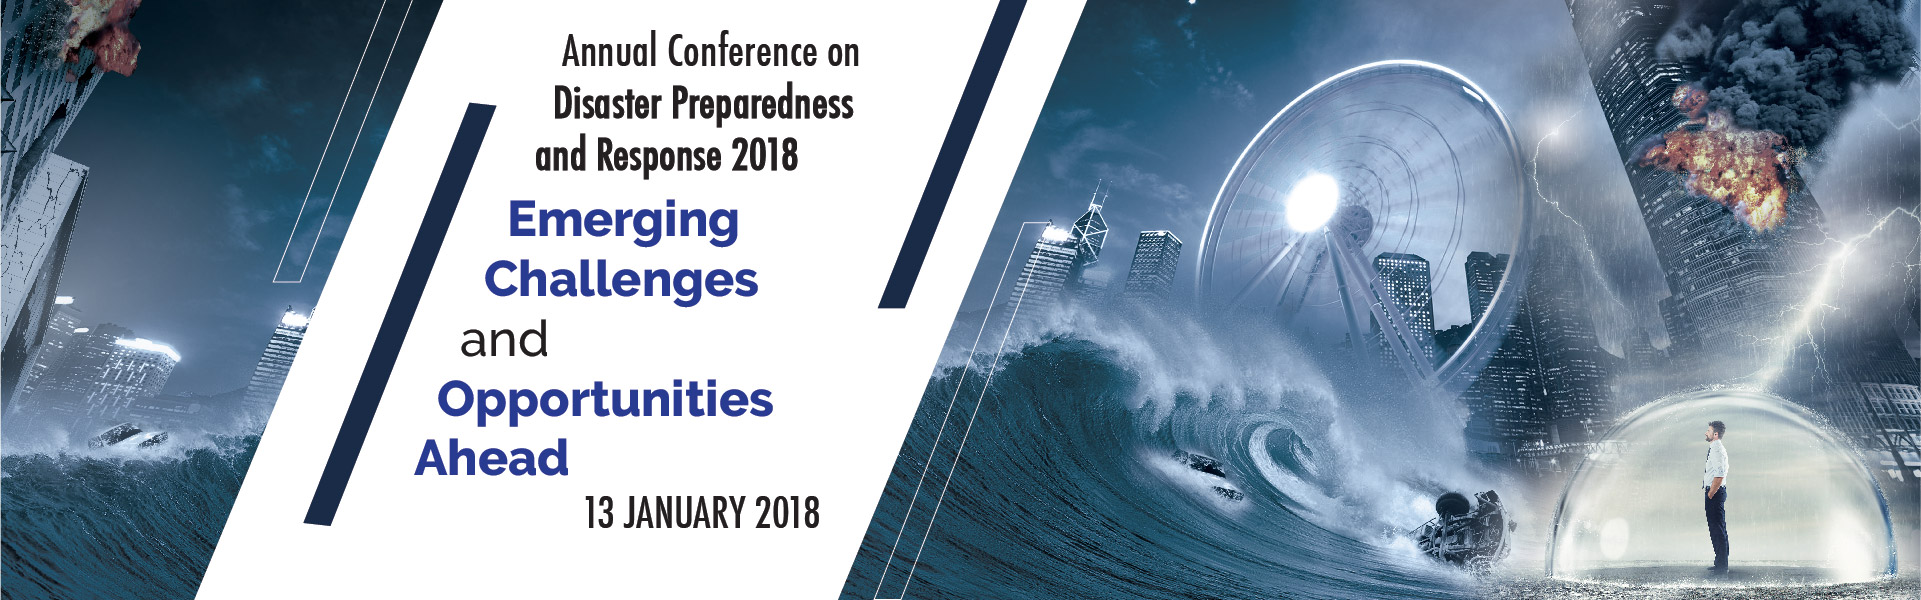 Annual Conference on Disaster Preparedness and Response (ACDPR) 2018: Emerging Challenges & Opportunities Ahead